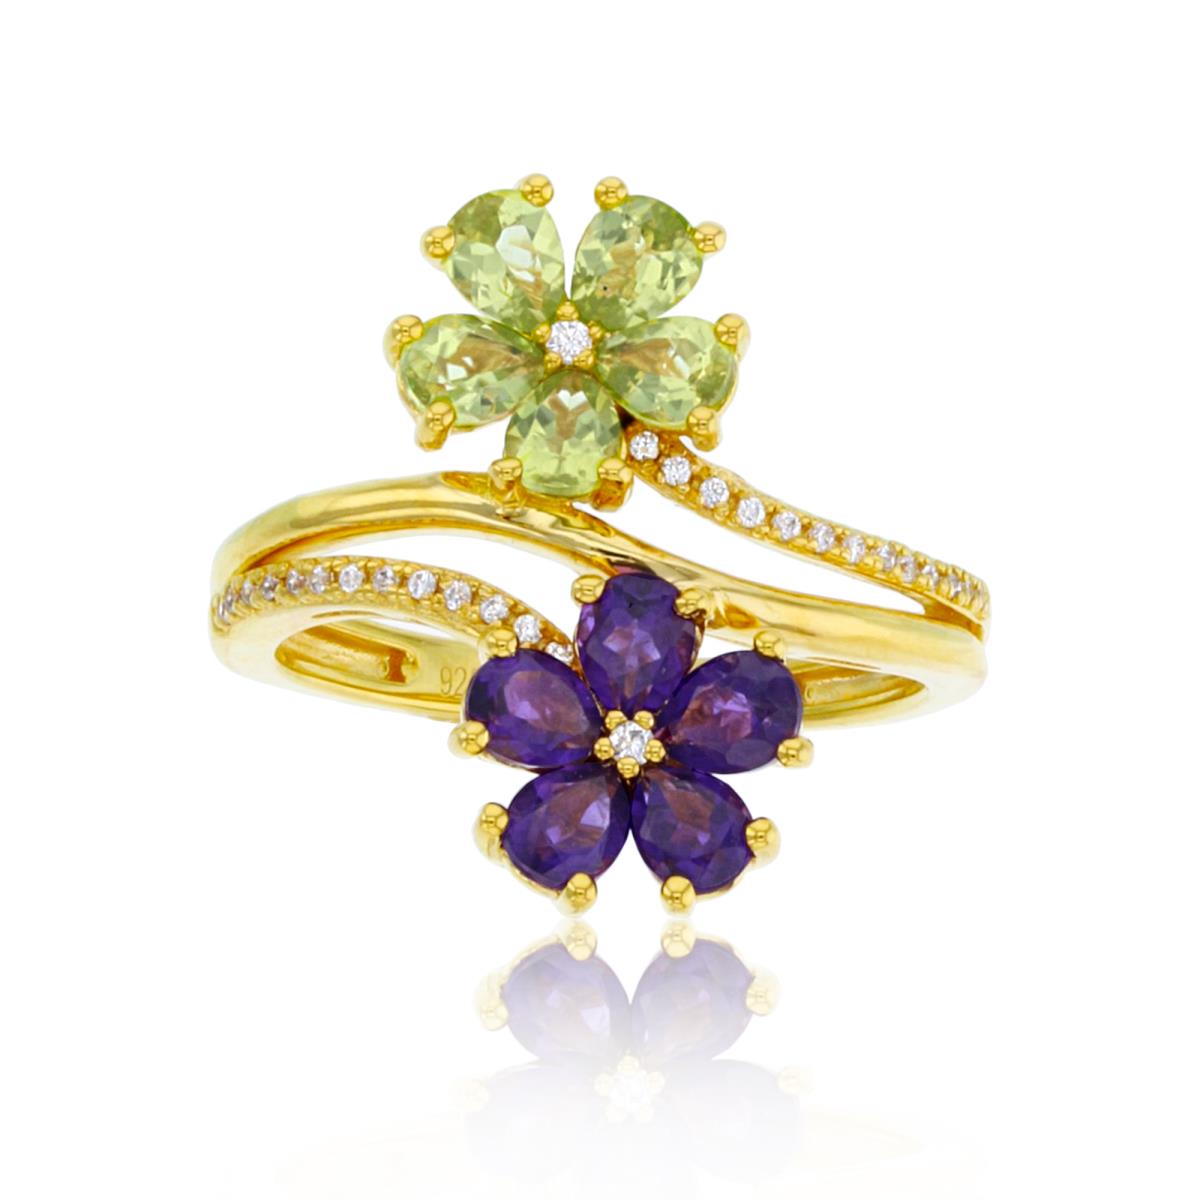 Sterling Silver+1Micron 14K Yellow Gold 0.10cttw Rnd Diam & 4x3mm PS Amethyst/Peridot Flowers Ring